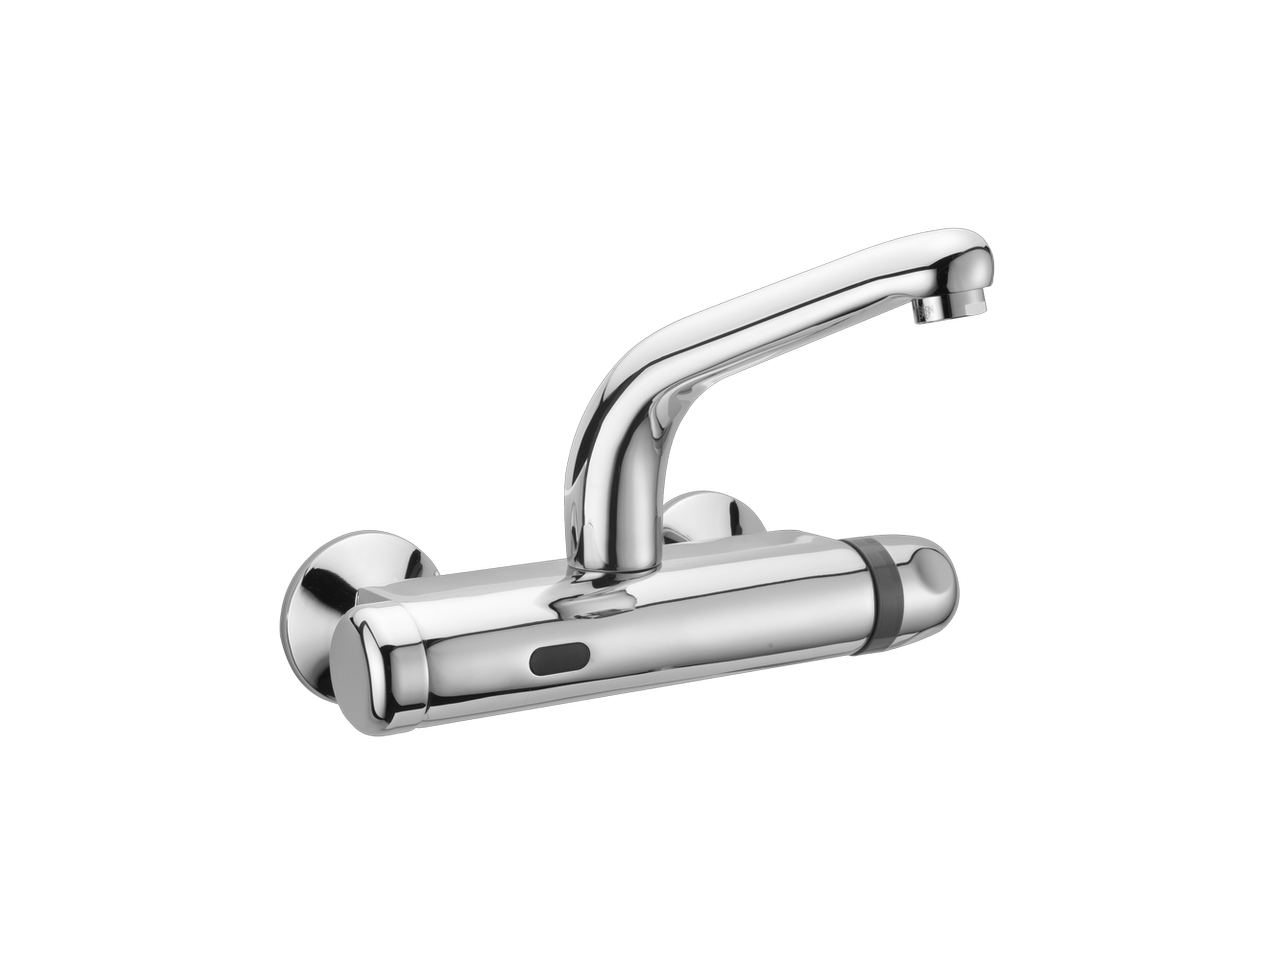 Thermo-electronic wall-mounted sink mixer COMMUNITY - v1